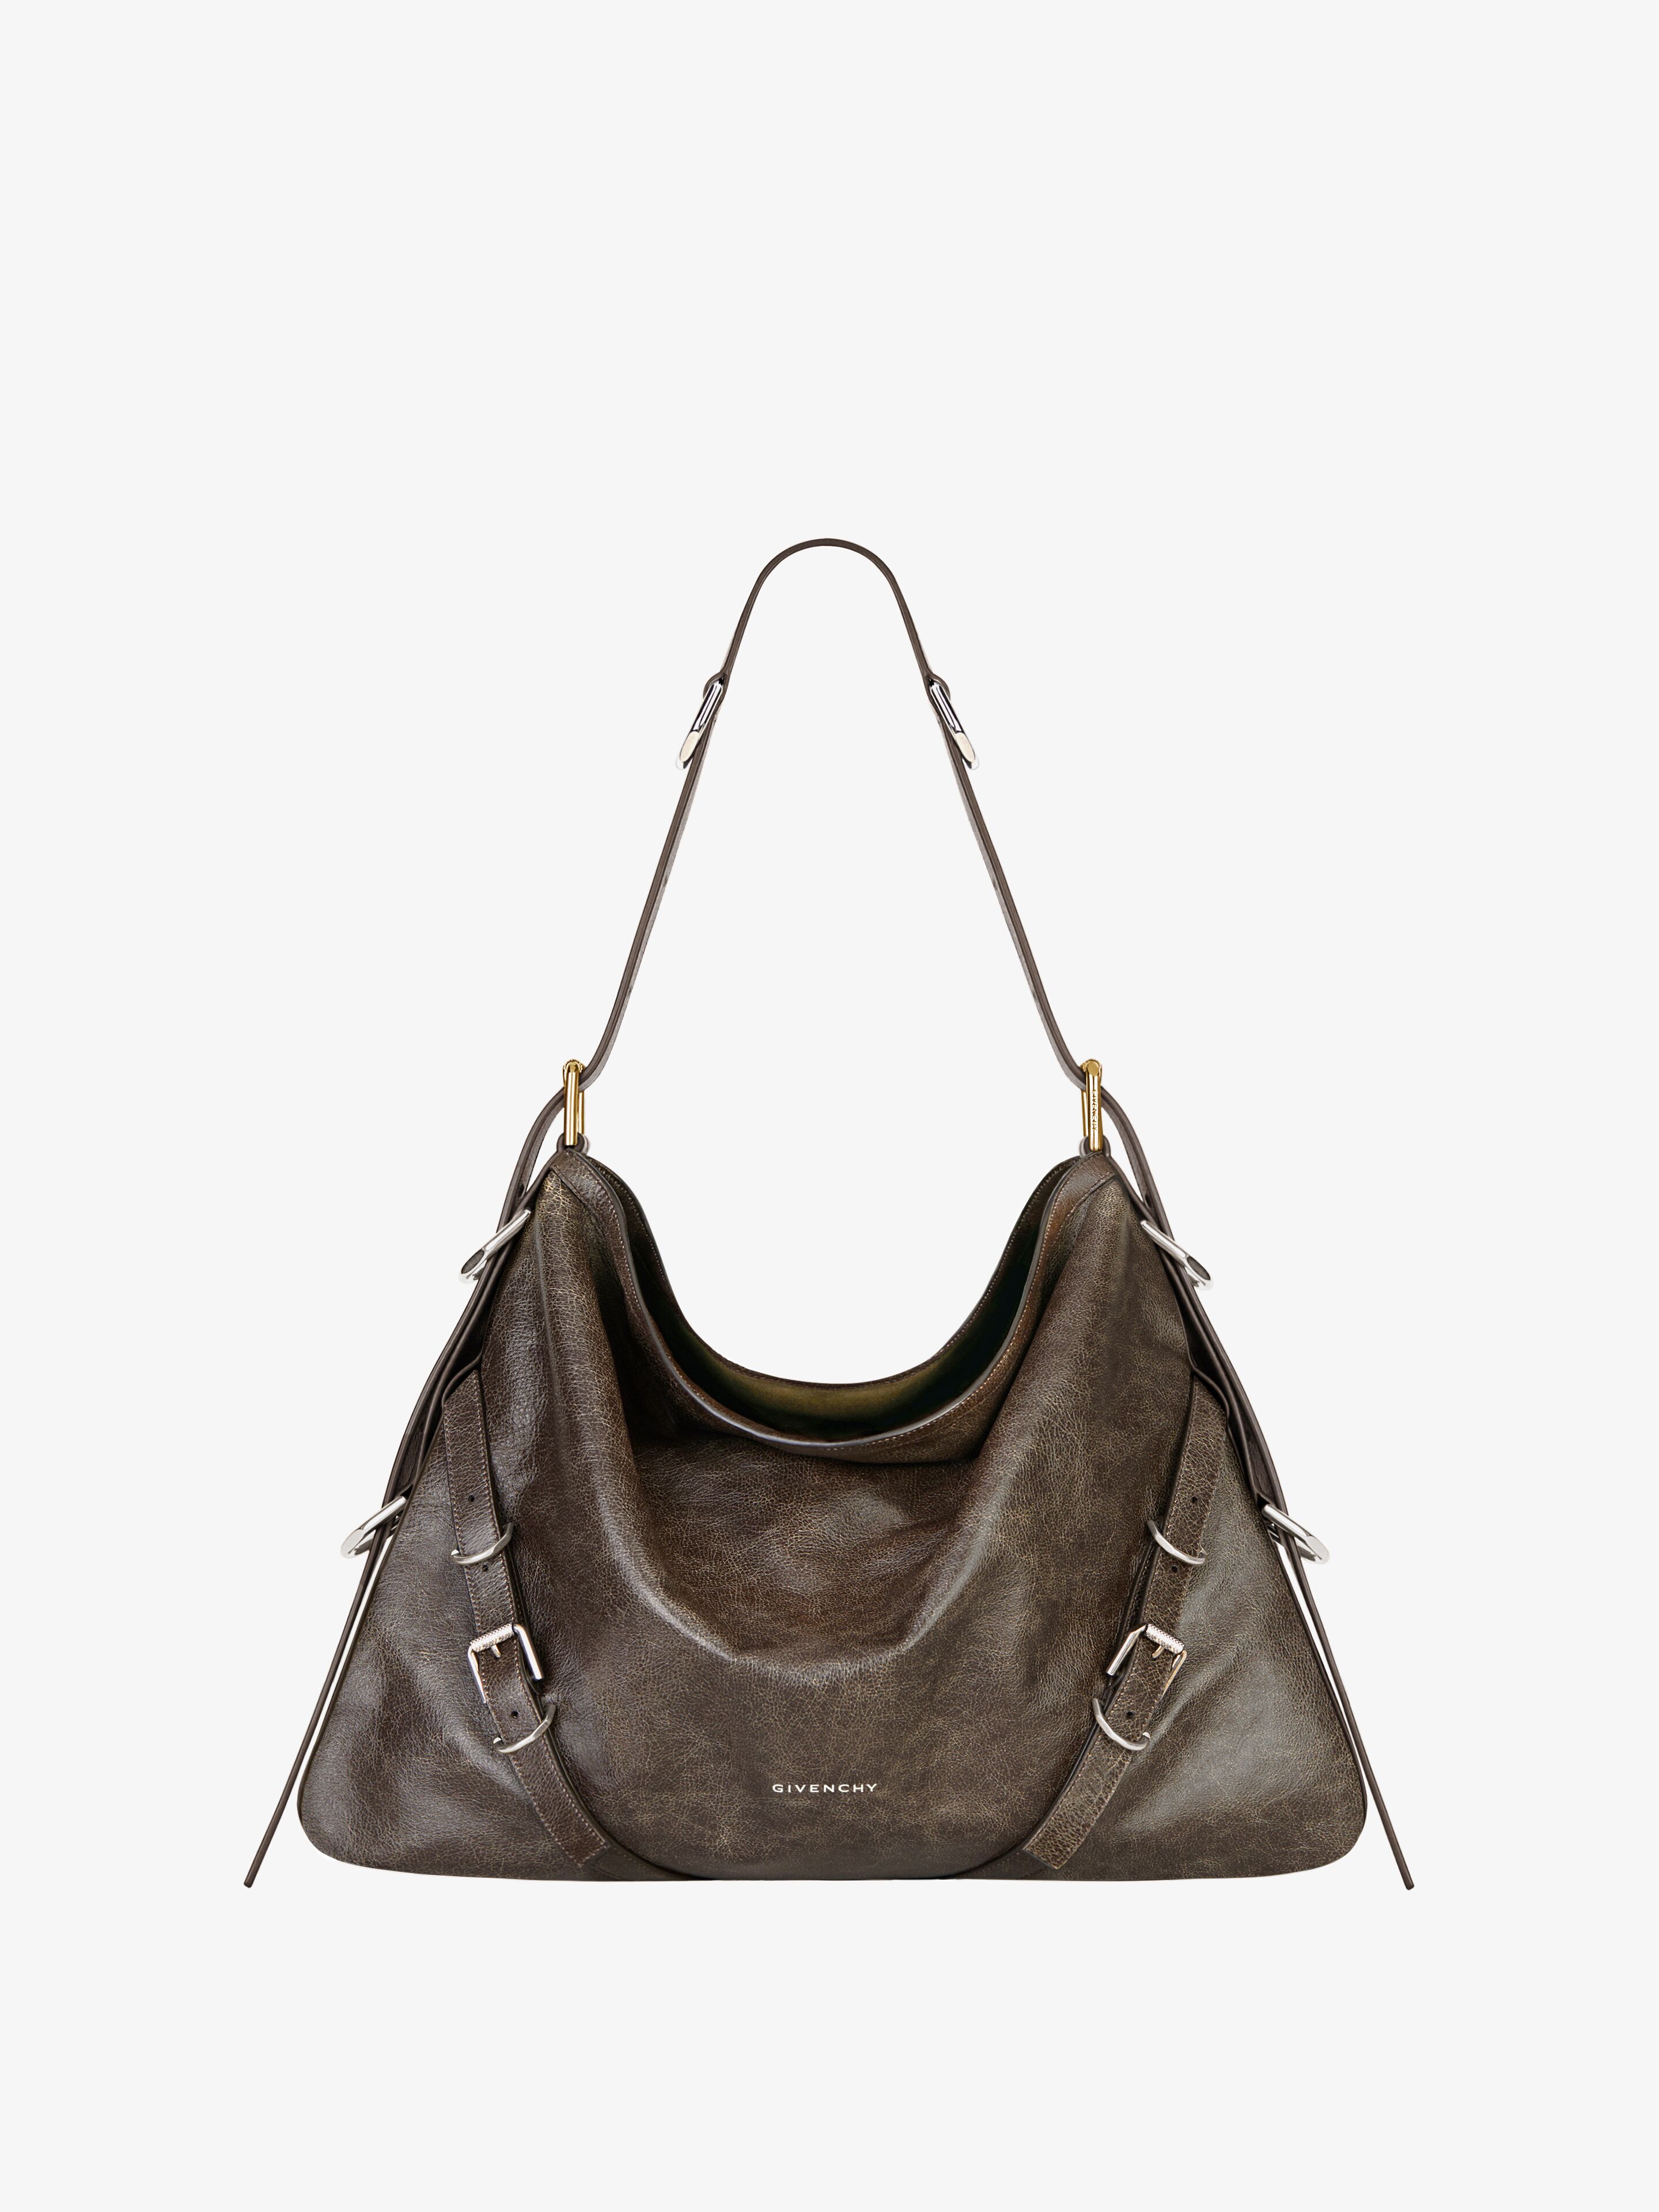 GIVENCHY MEDIUM VOYOU BAG IN AGED LEATHER